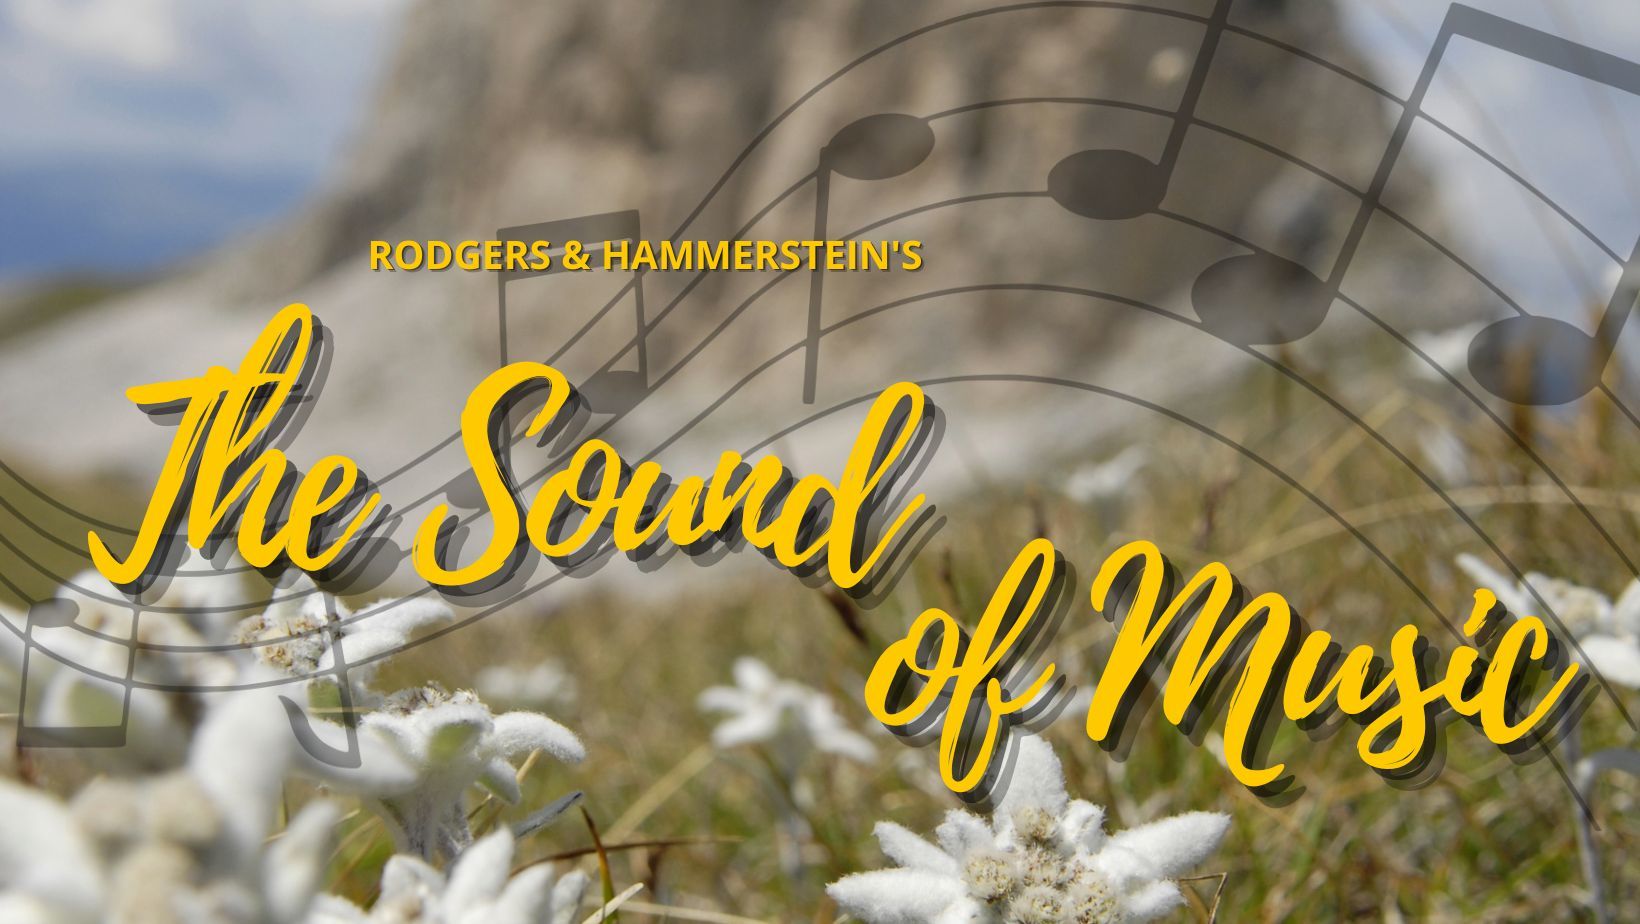 MIOpera presents Rodgers and Hammerstein's The Sound of Music, Normal, Illinois, United States